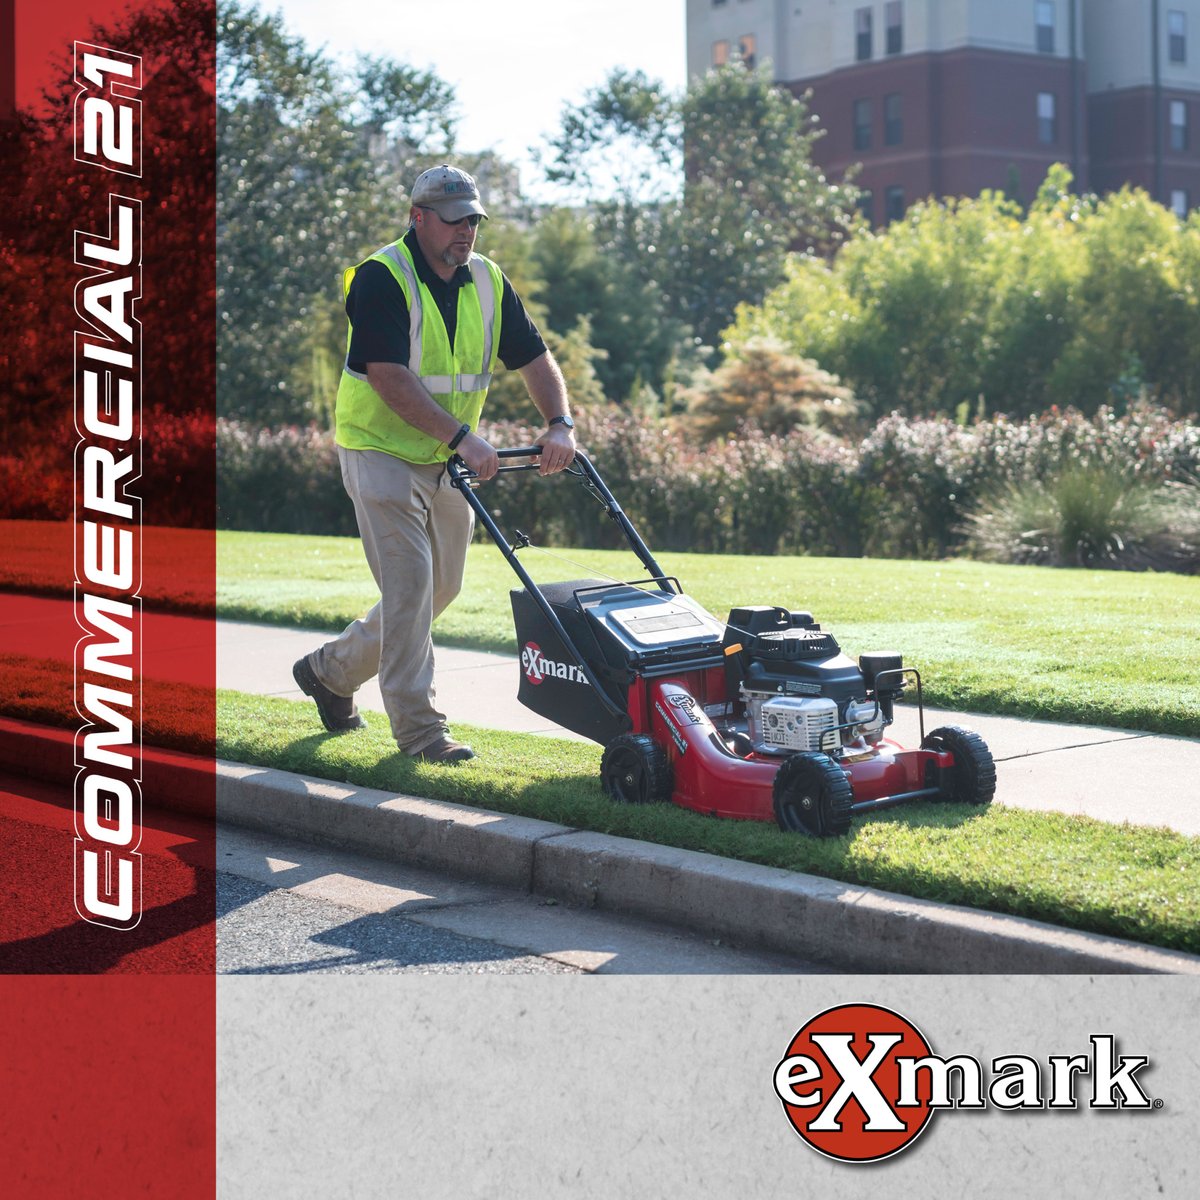 👀 Looking for a versatile #walkbehindmower? Find what you are looking for with the @Exmarkmowers #Commercial 21 X-Series mower! 🙌

⛽💪 The 1-gall. fuel tank and powerful Kawasaki engine give this machine a cutting-edge. See what else sets it apart at bit.ly/3p66Edo.